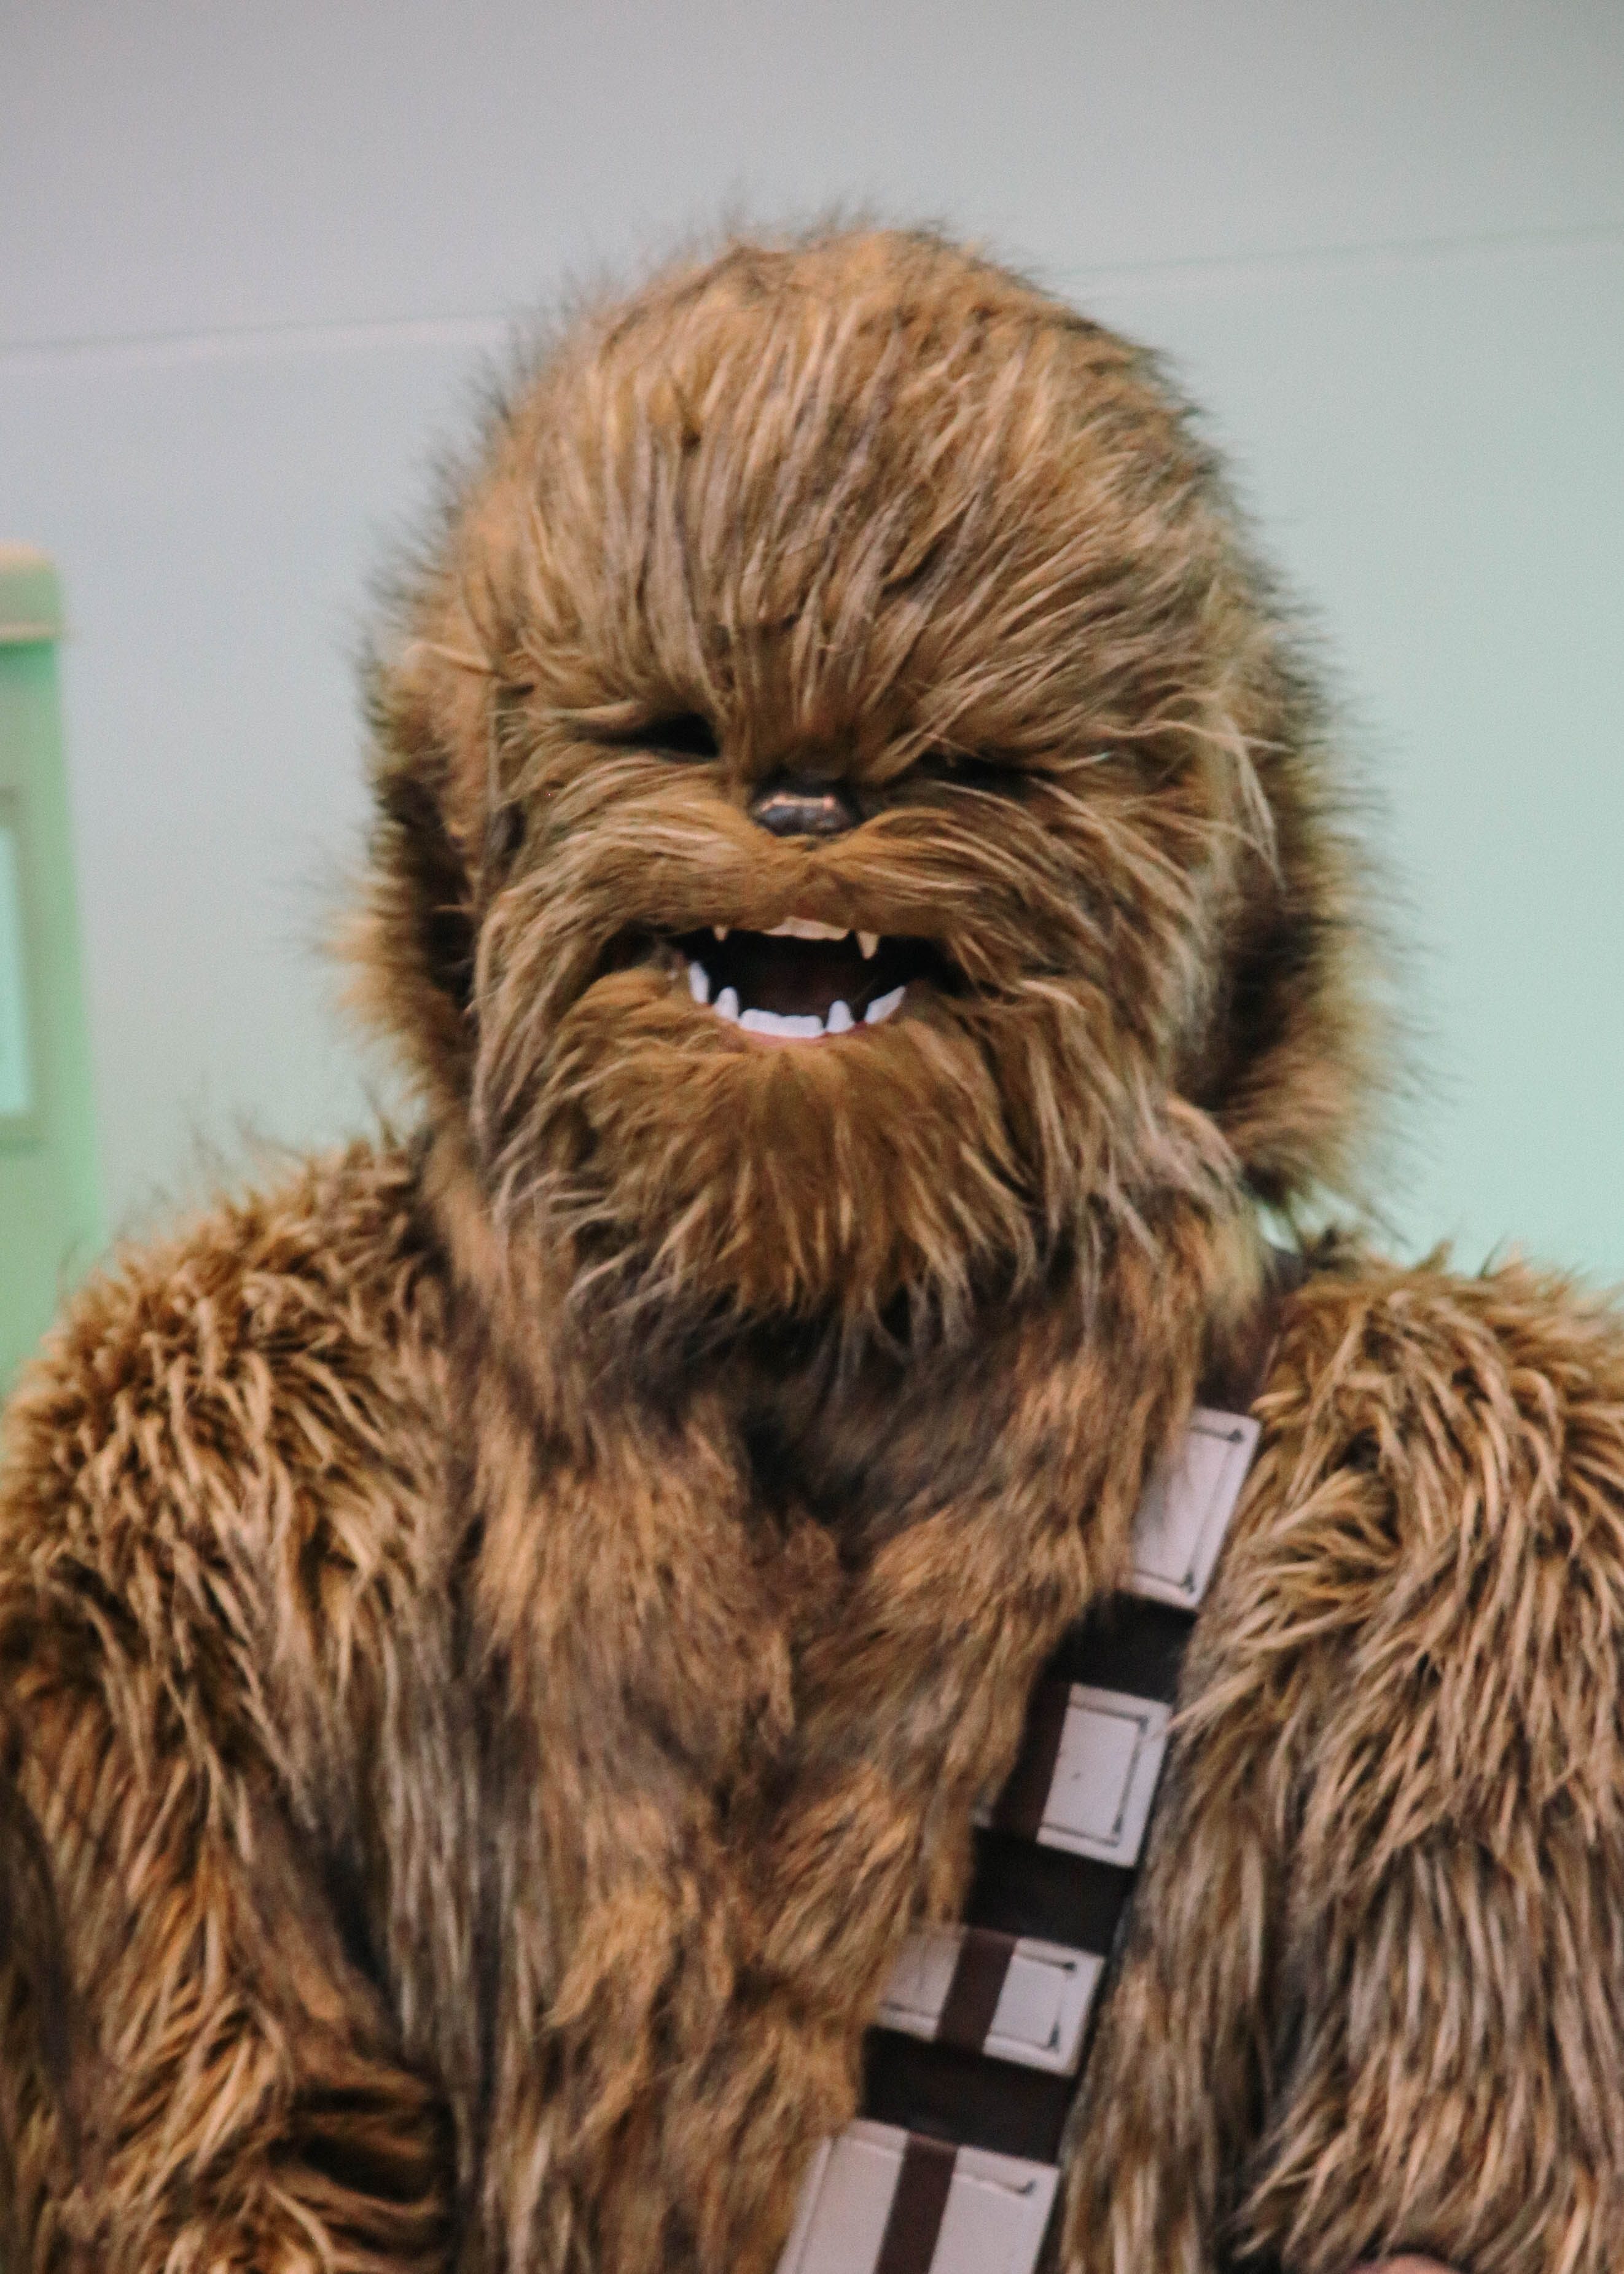 Chewbacca cosplayer. Photo by Paolo Abad/Rappler 